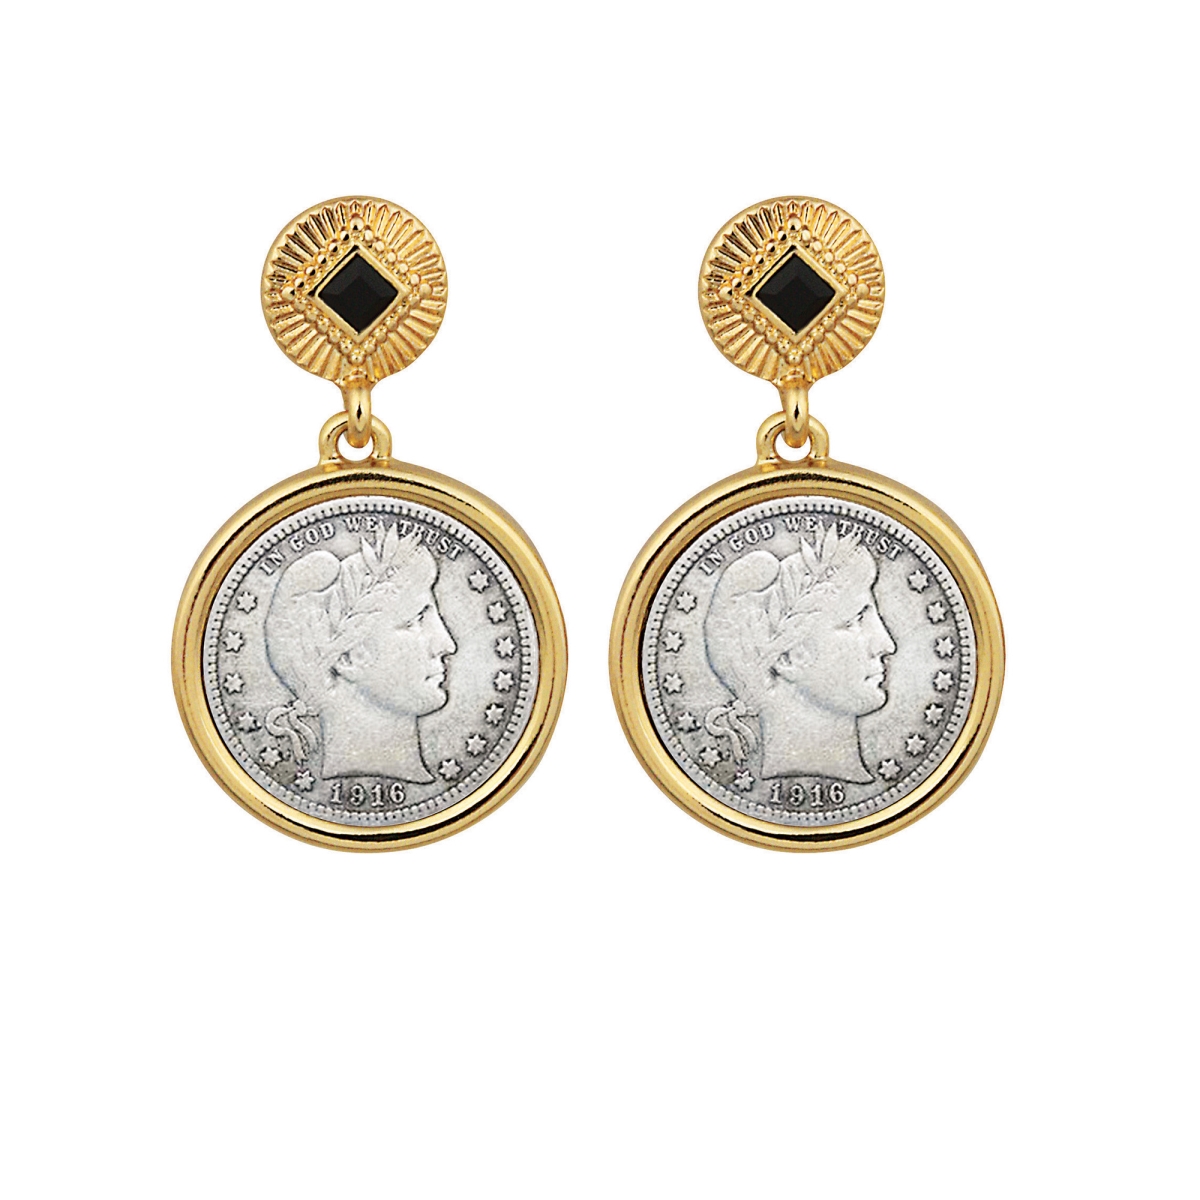 Picture of American Coin Treasures 17096 Barber Dime Coin Goldtone Art Decor Earrings with Black Stone, Gold